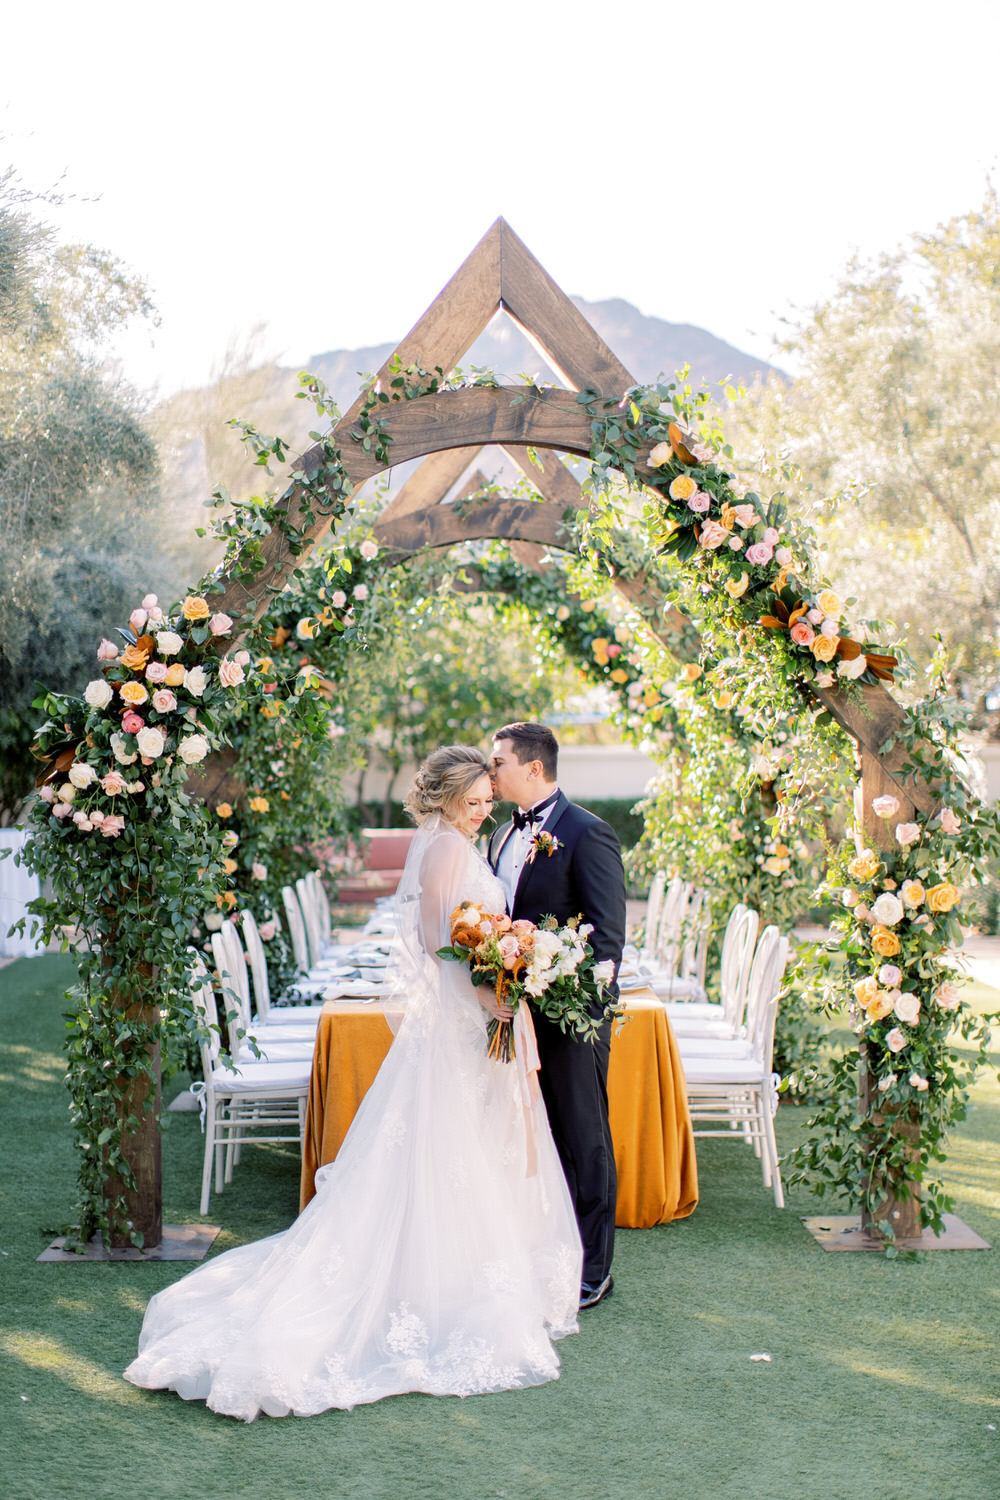 wooden arches decorated in lush florals with the groom kissing the bride's head underneath it all